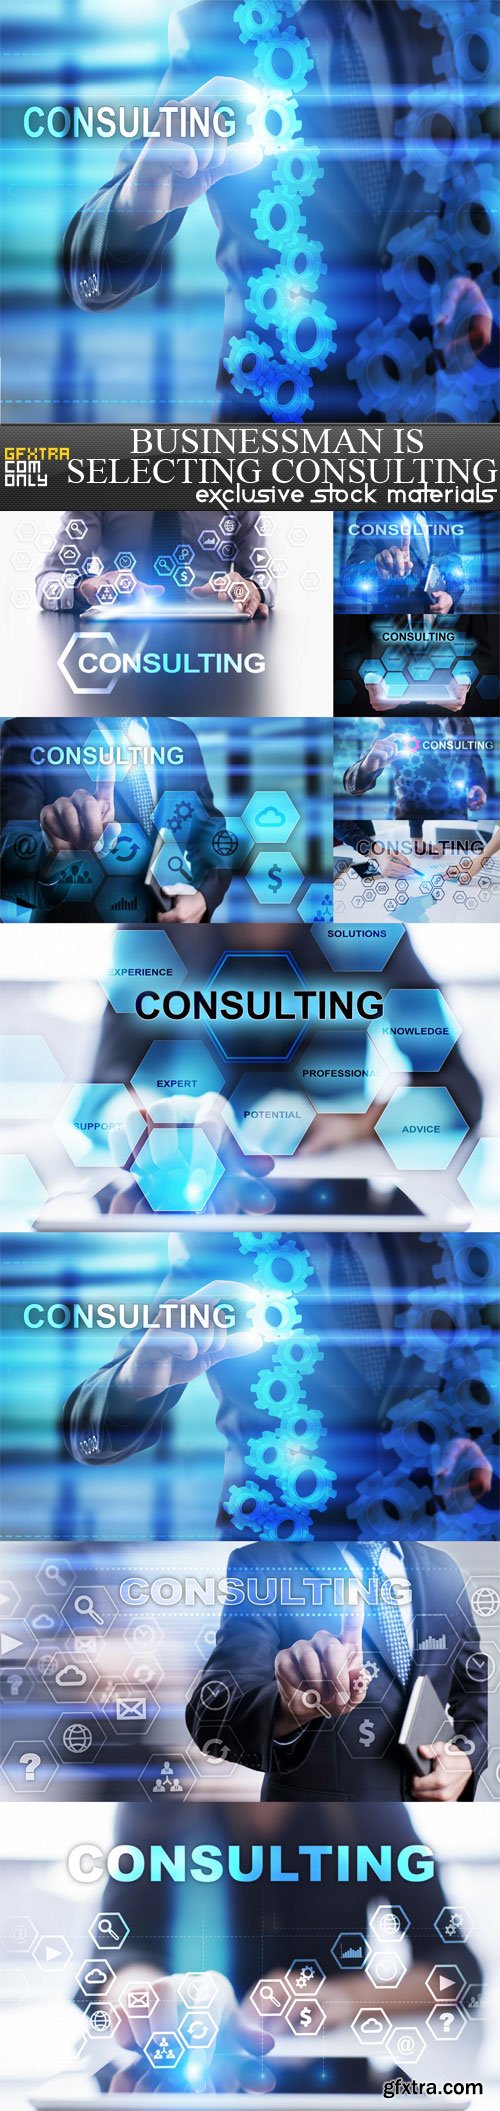 Businessman is selecting Consulting, 10 UHQ JPEG